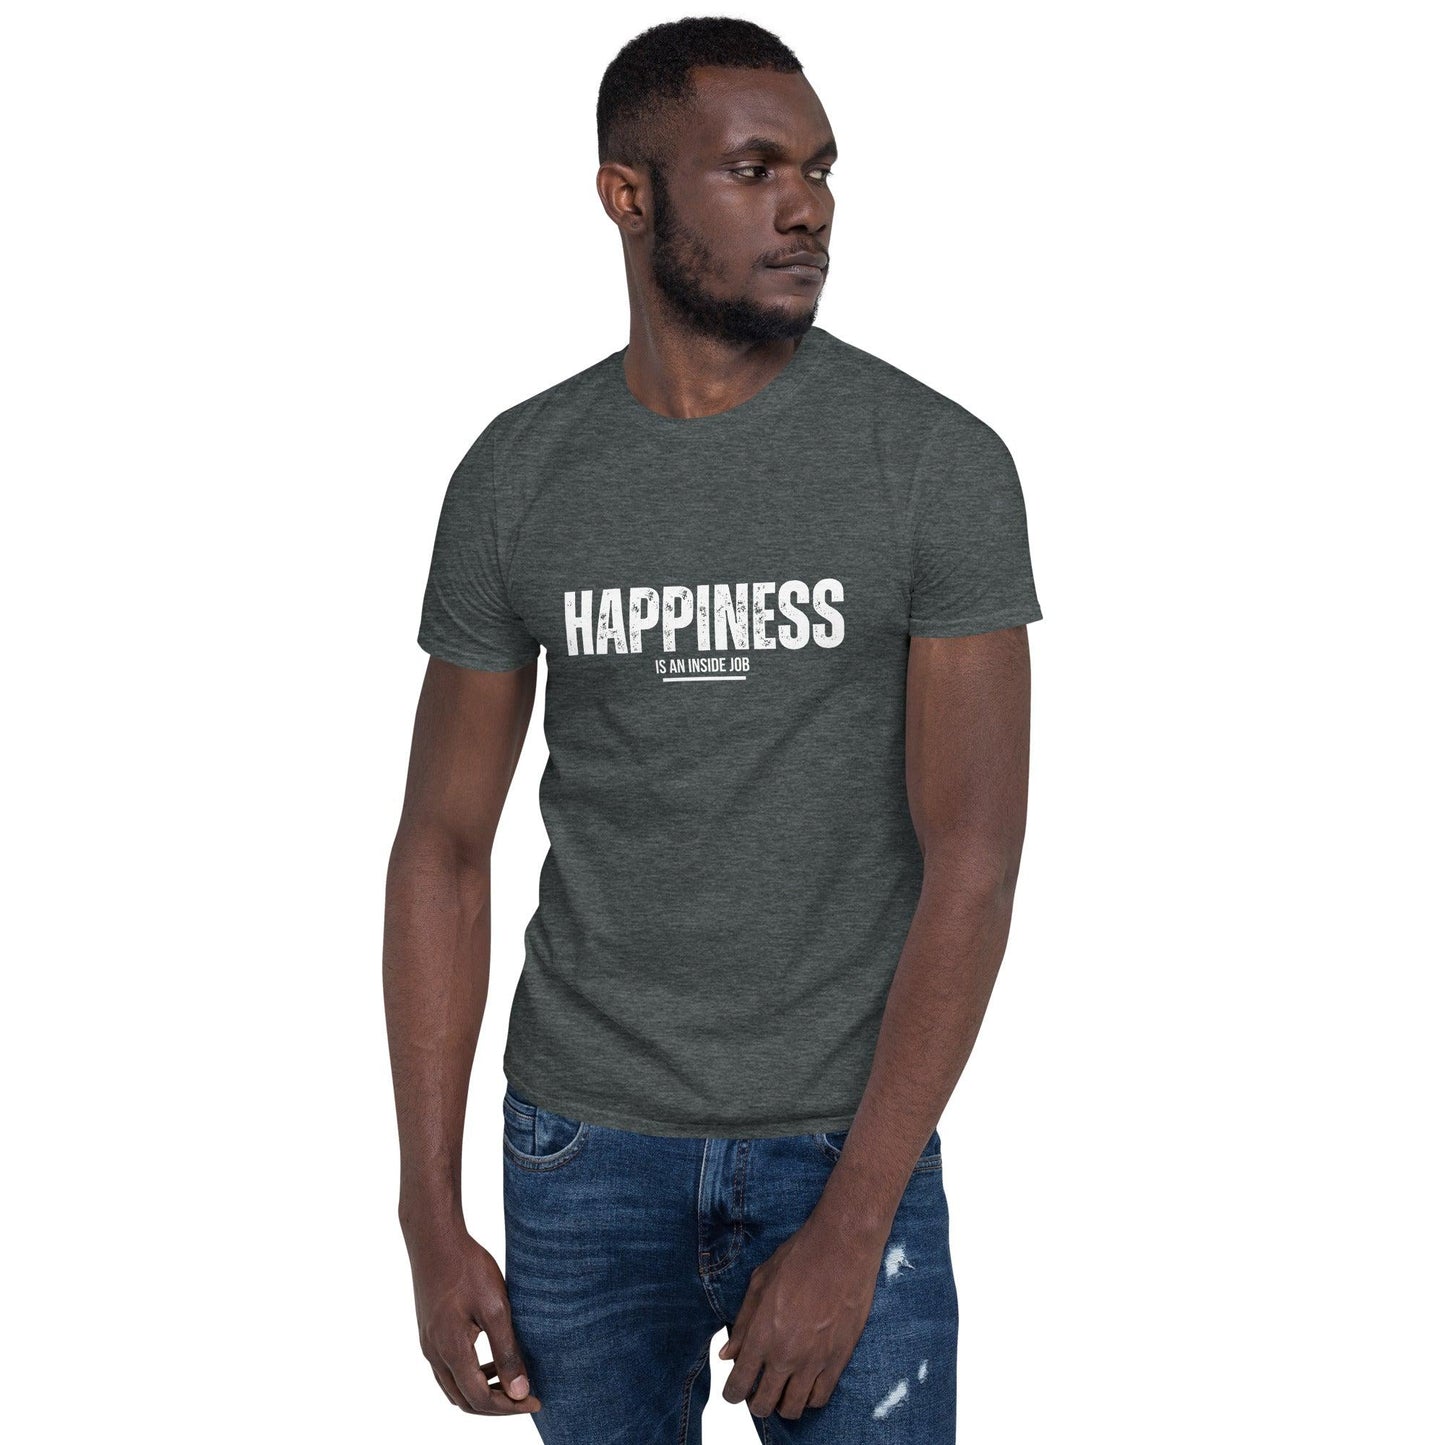 Essential Crew T-Shirt - Happiness is an inside job